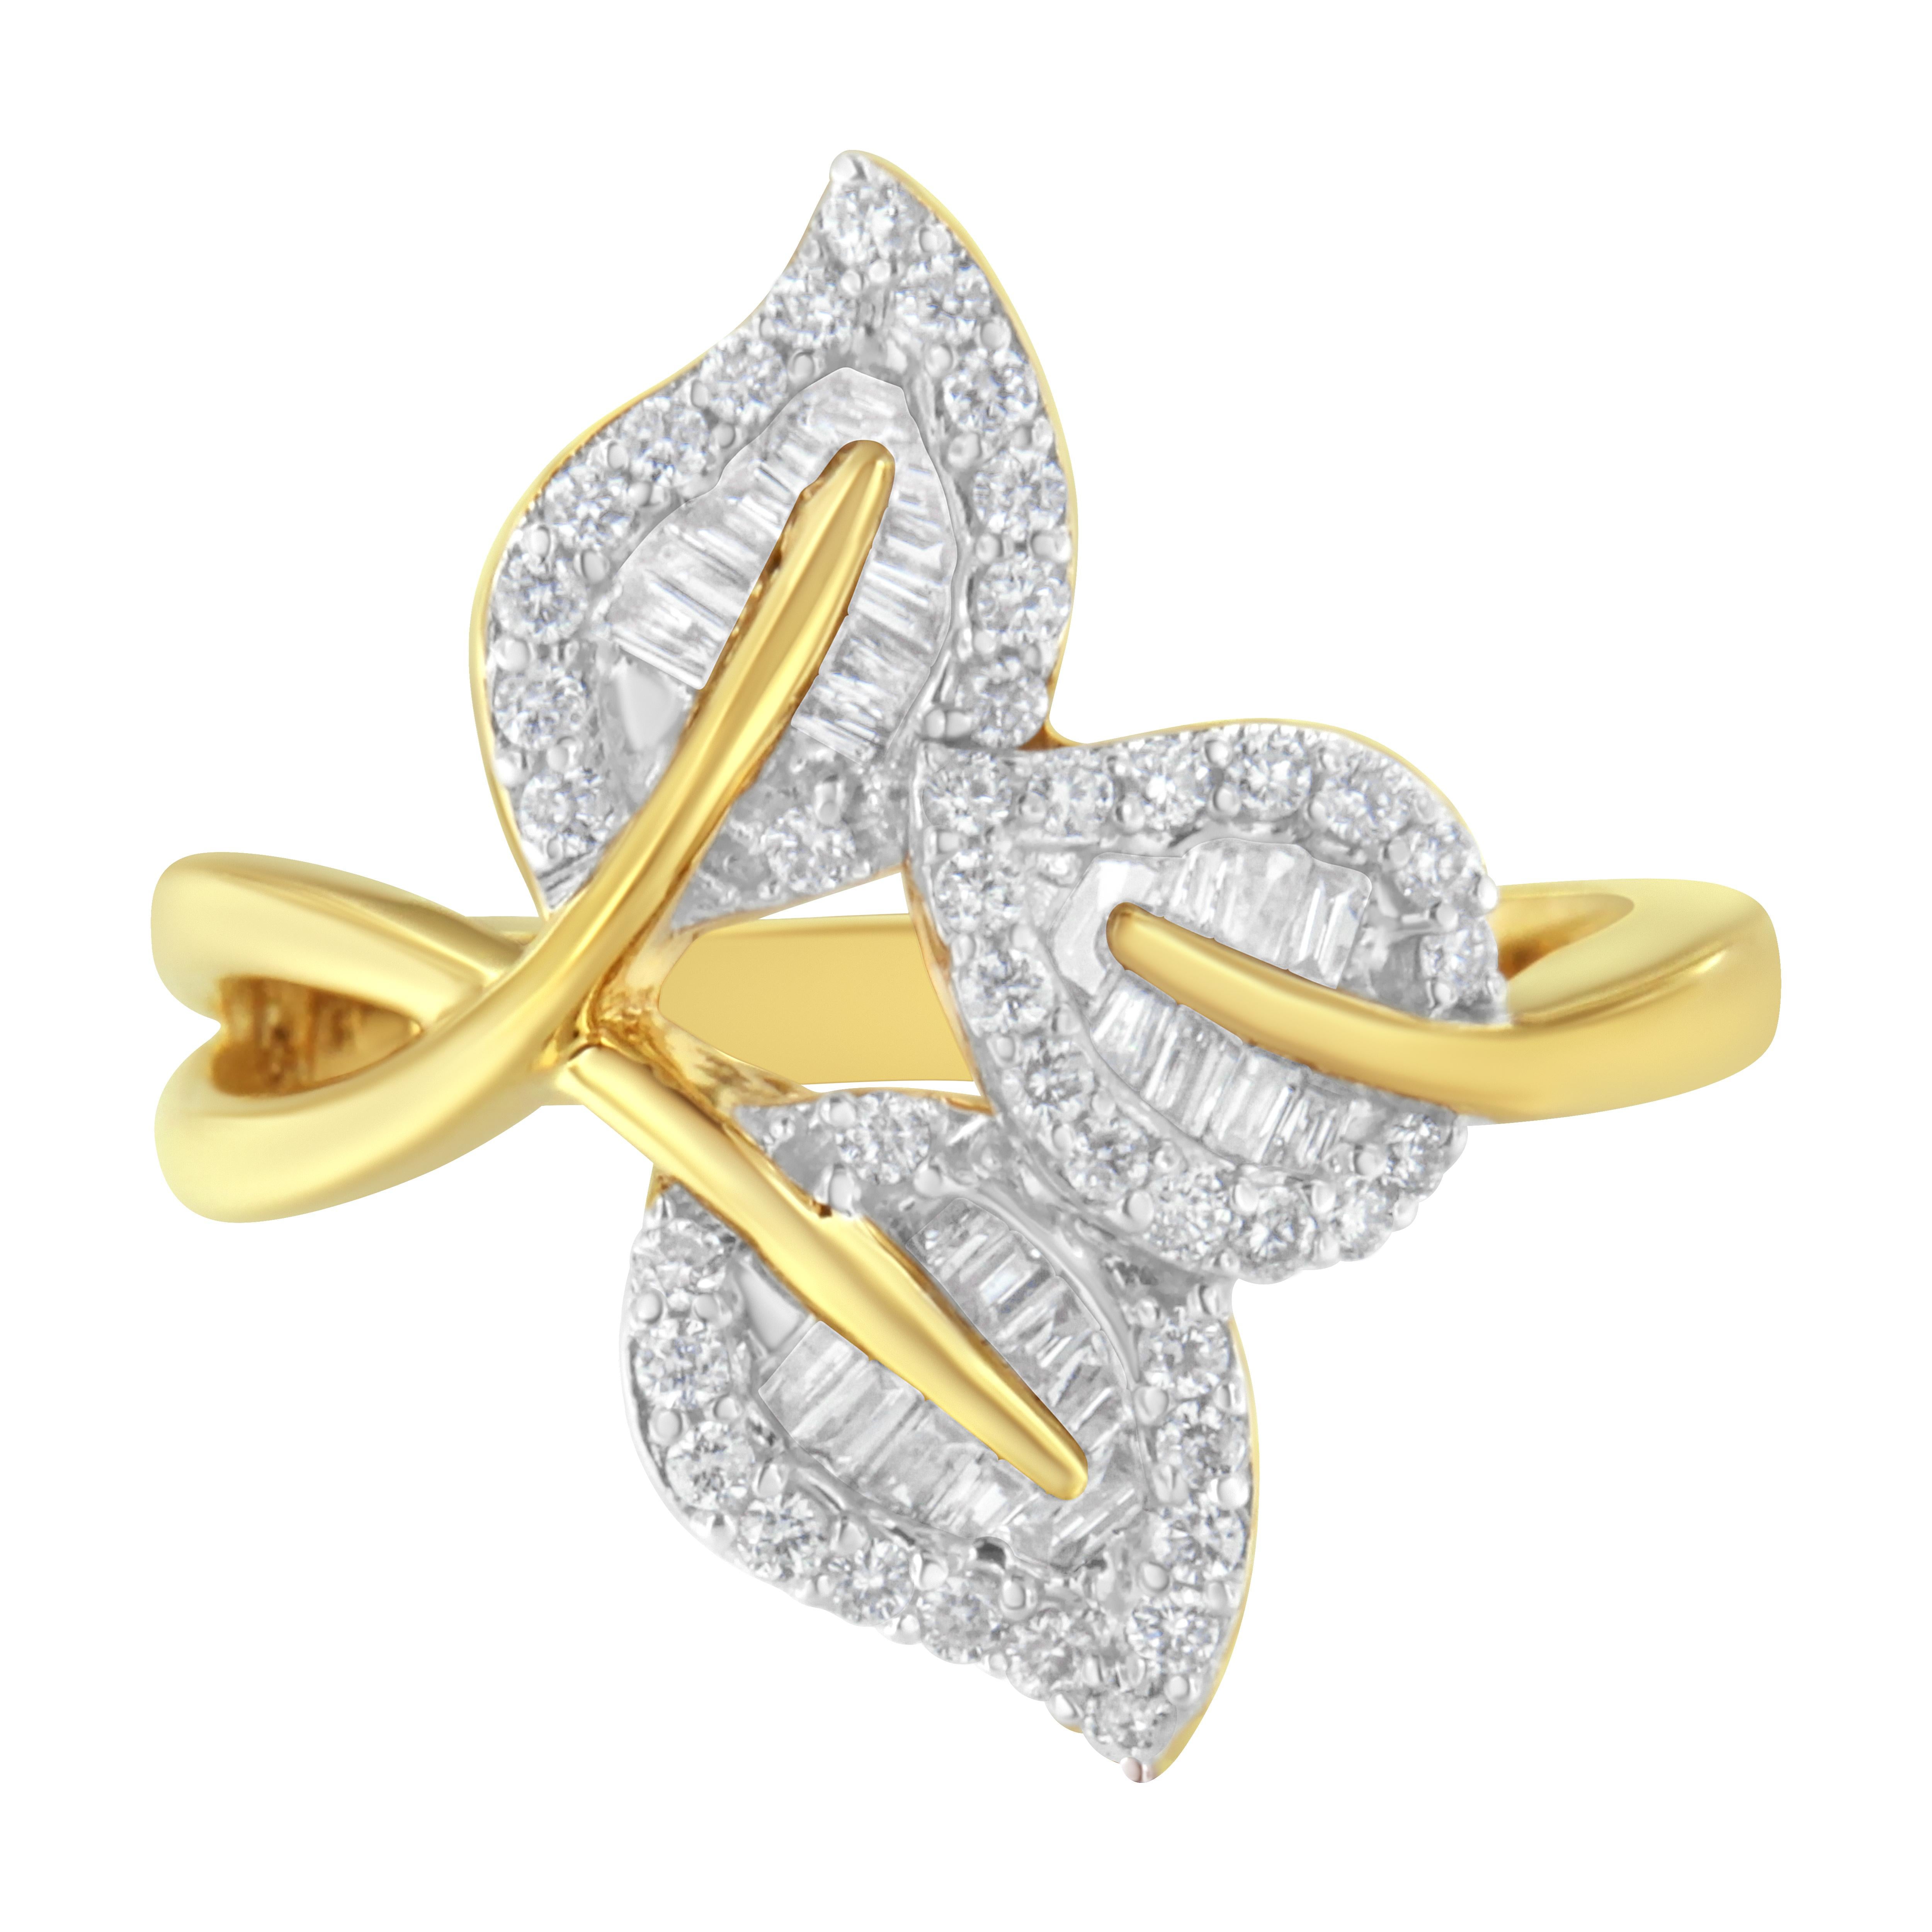 This stunning nature inspired ring design is perfect for everyday wear. Crafted from 10k yellow gold, this design features 1/2ct TDW of natural round and baguette diamonds. A warm yellow gold ring band holds as its centerpiece a trio of diamond